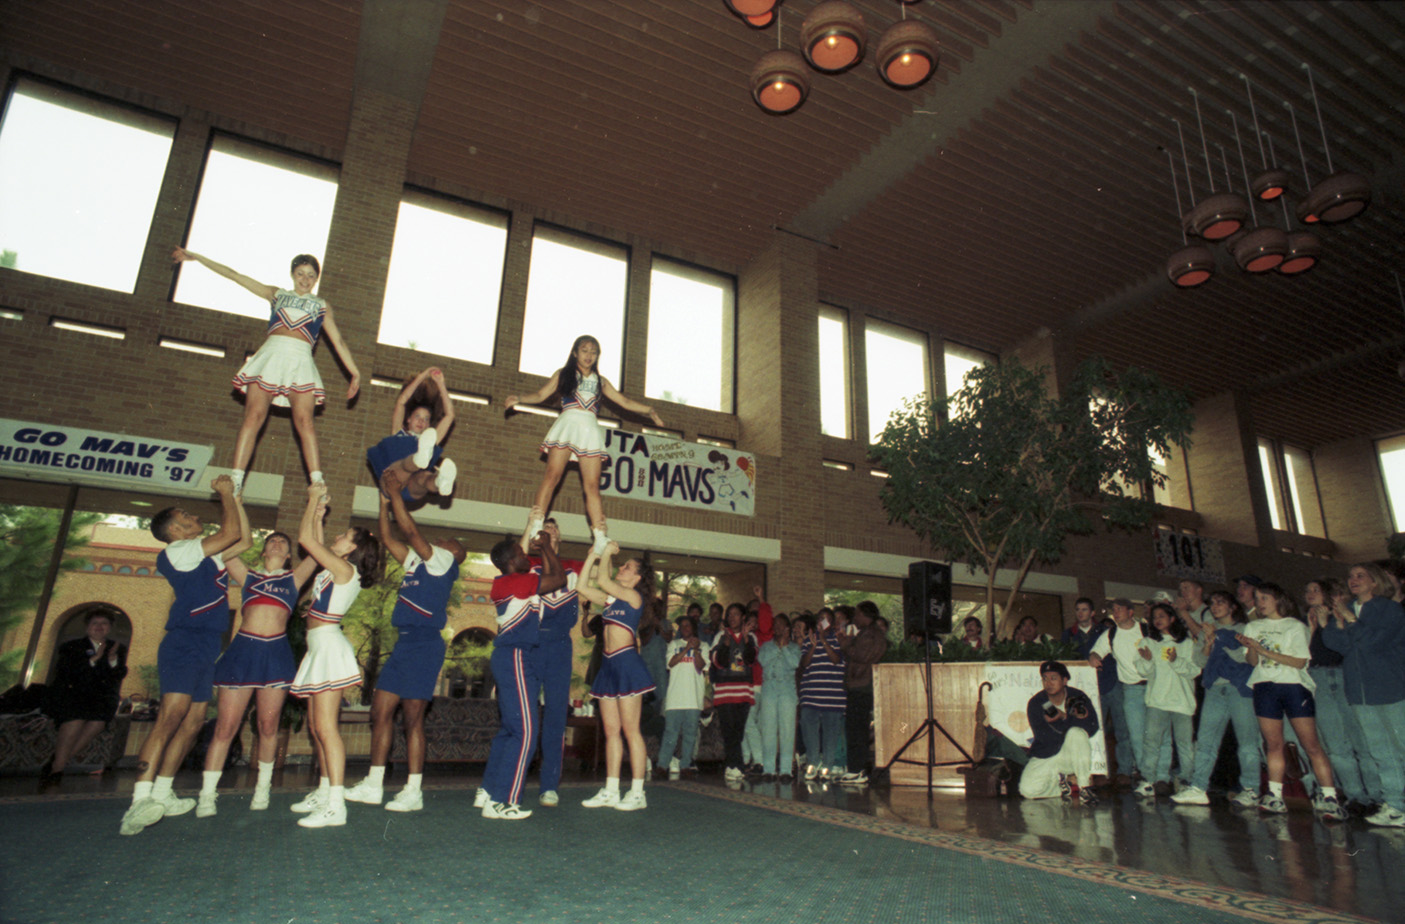 Cheerleaders performing inside the University Center with a crowd in the background.